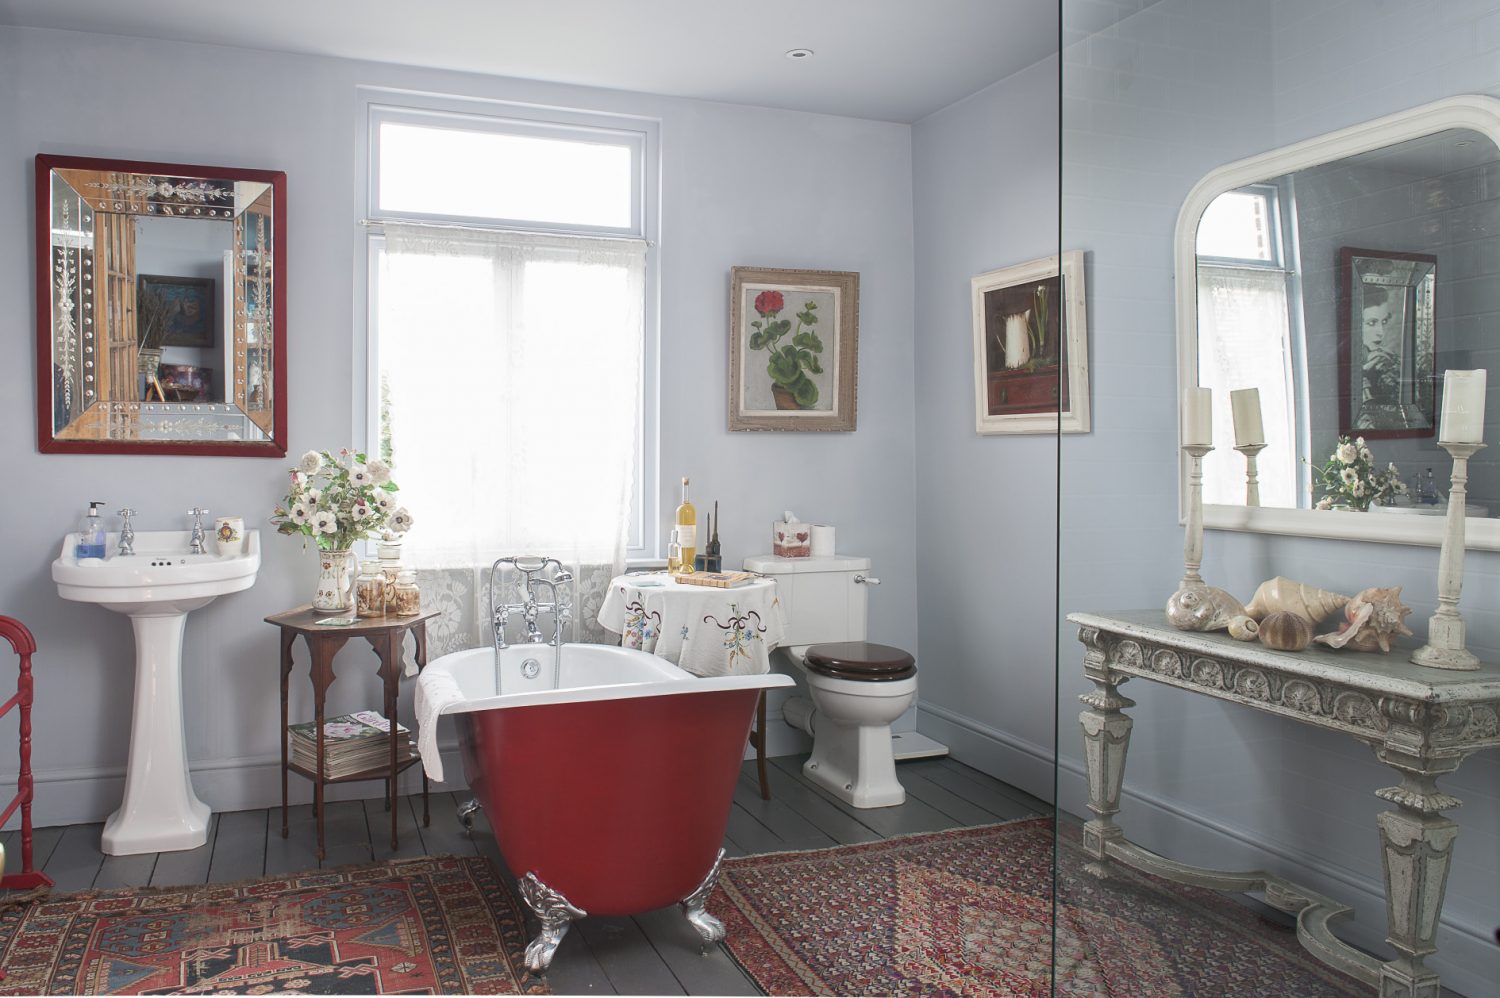 The main bathroom was not designed as a bathroom, as such, but was simply another room to which Emma could introduce beauty and interest, though it does include a luxurious roll-top bath and space-age walk-in shower